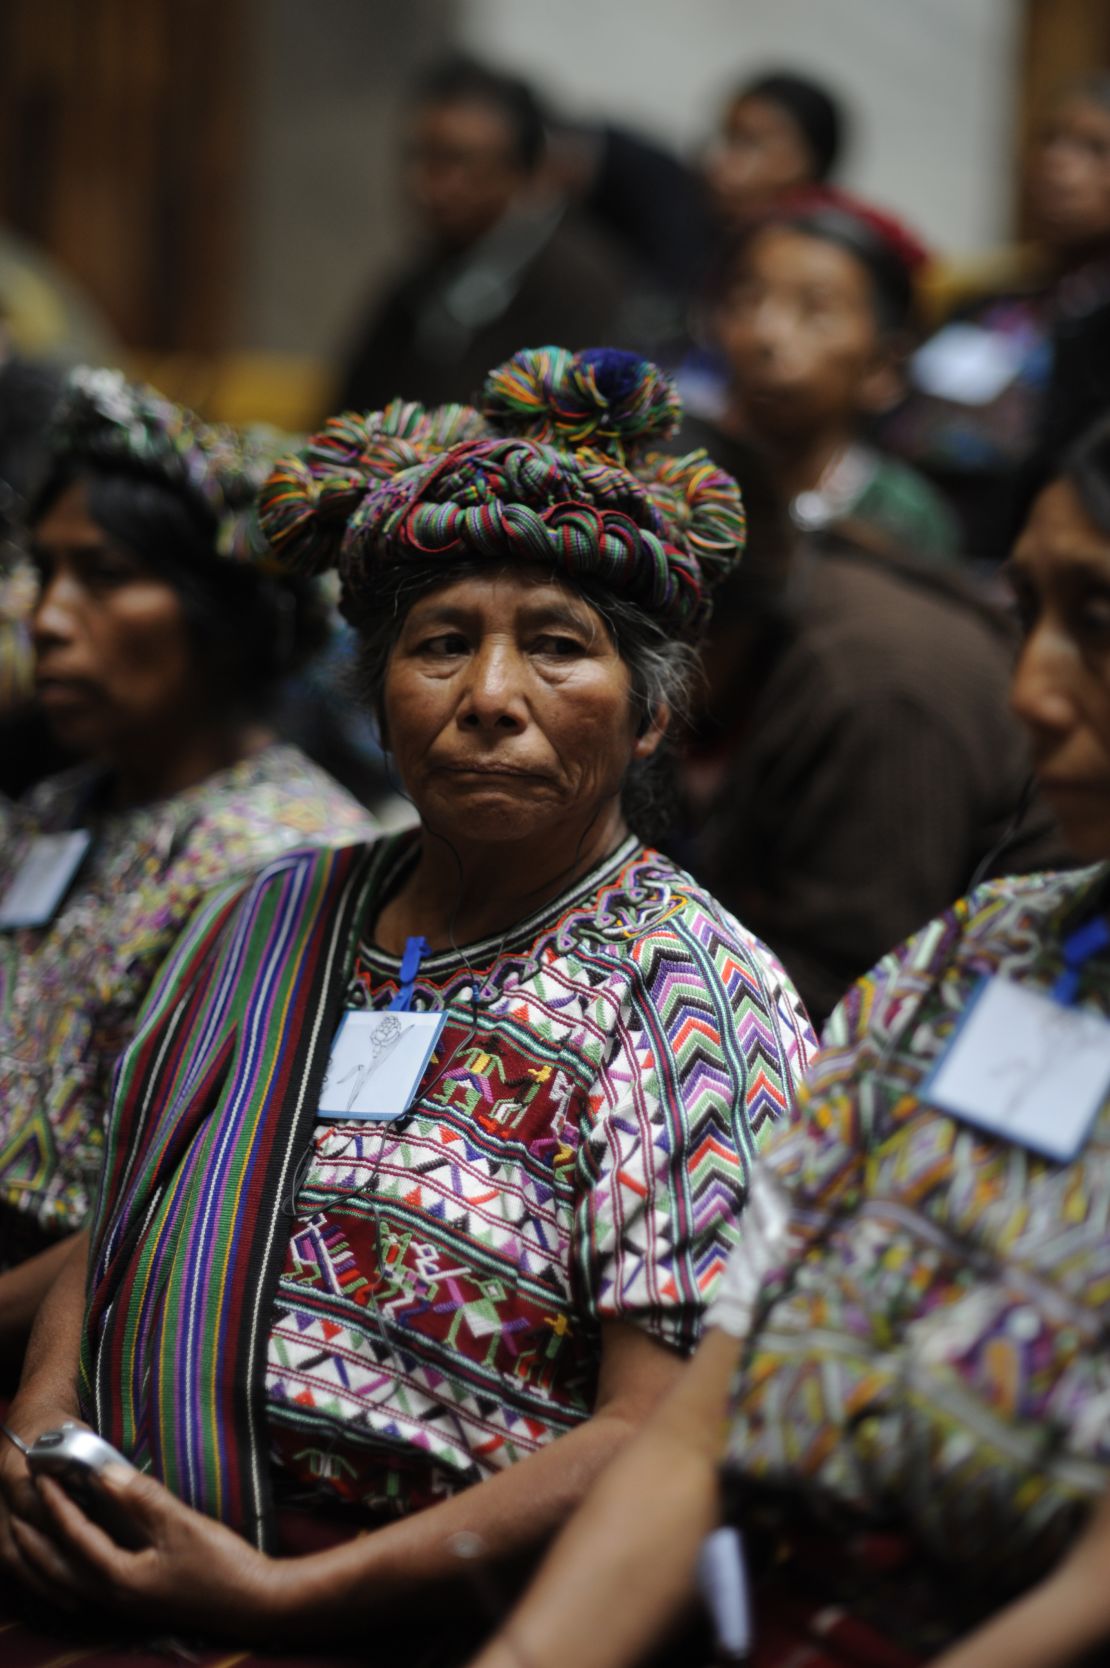 Painful public testimony could help heal the national betrayal reflected in the faces of many Guatemalan Mayans.